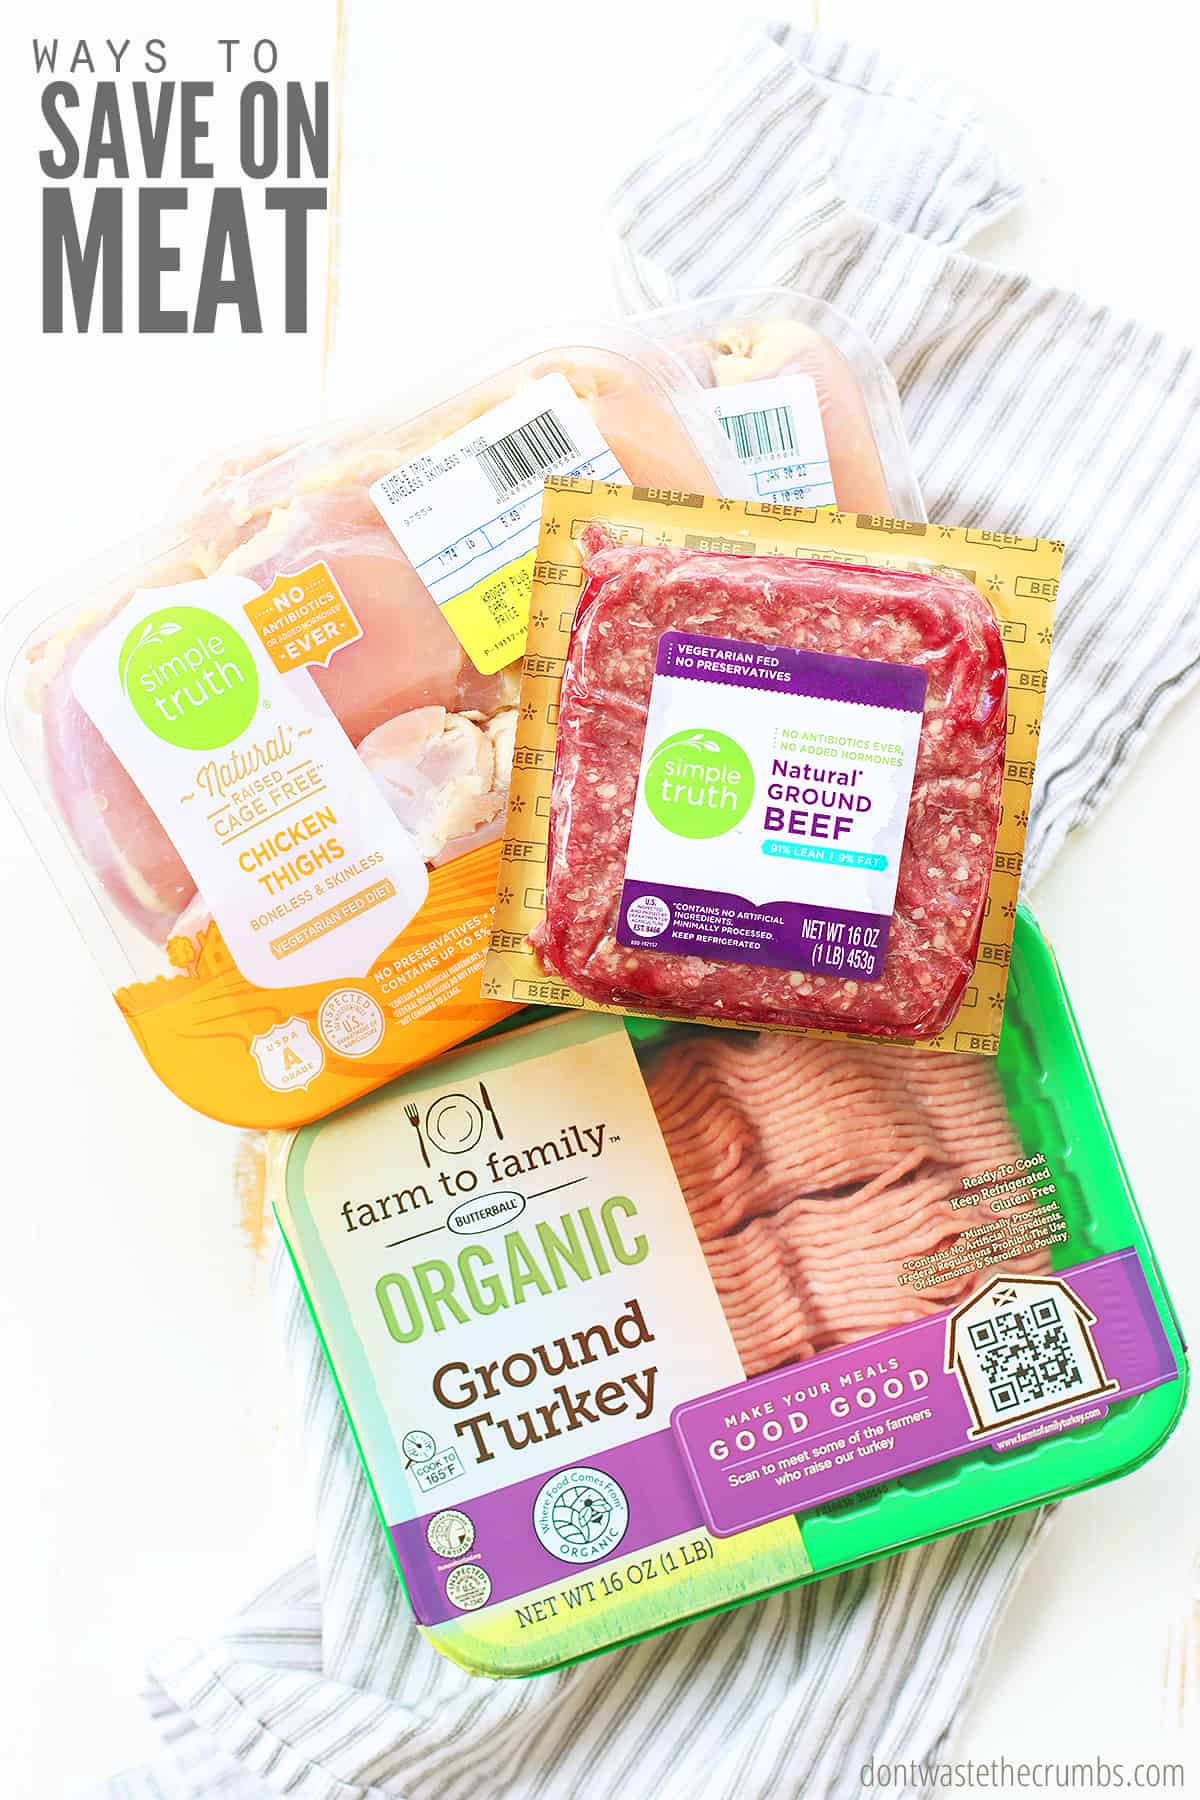 Trim your grocery budget with these 11 ways to save money on meat at the store. From steak to bacon to coupons and sales - lots of ways to save money!